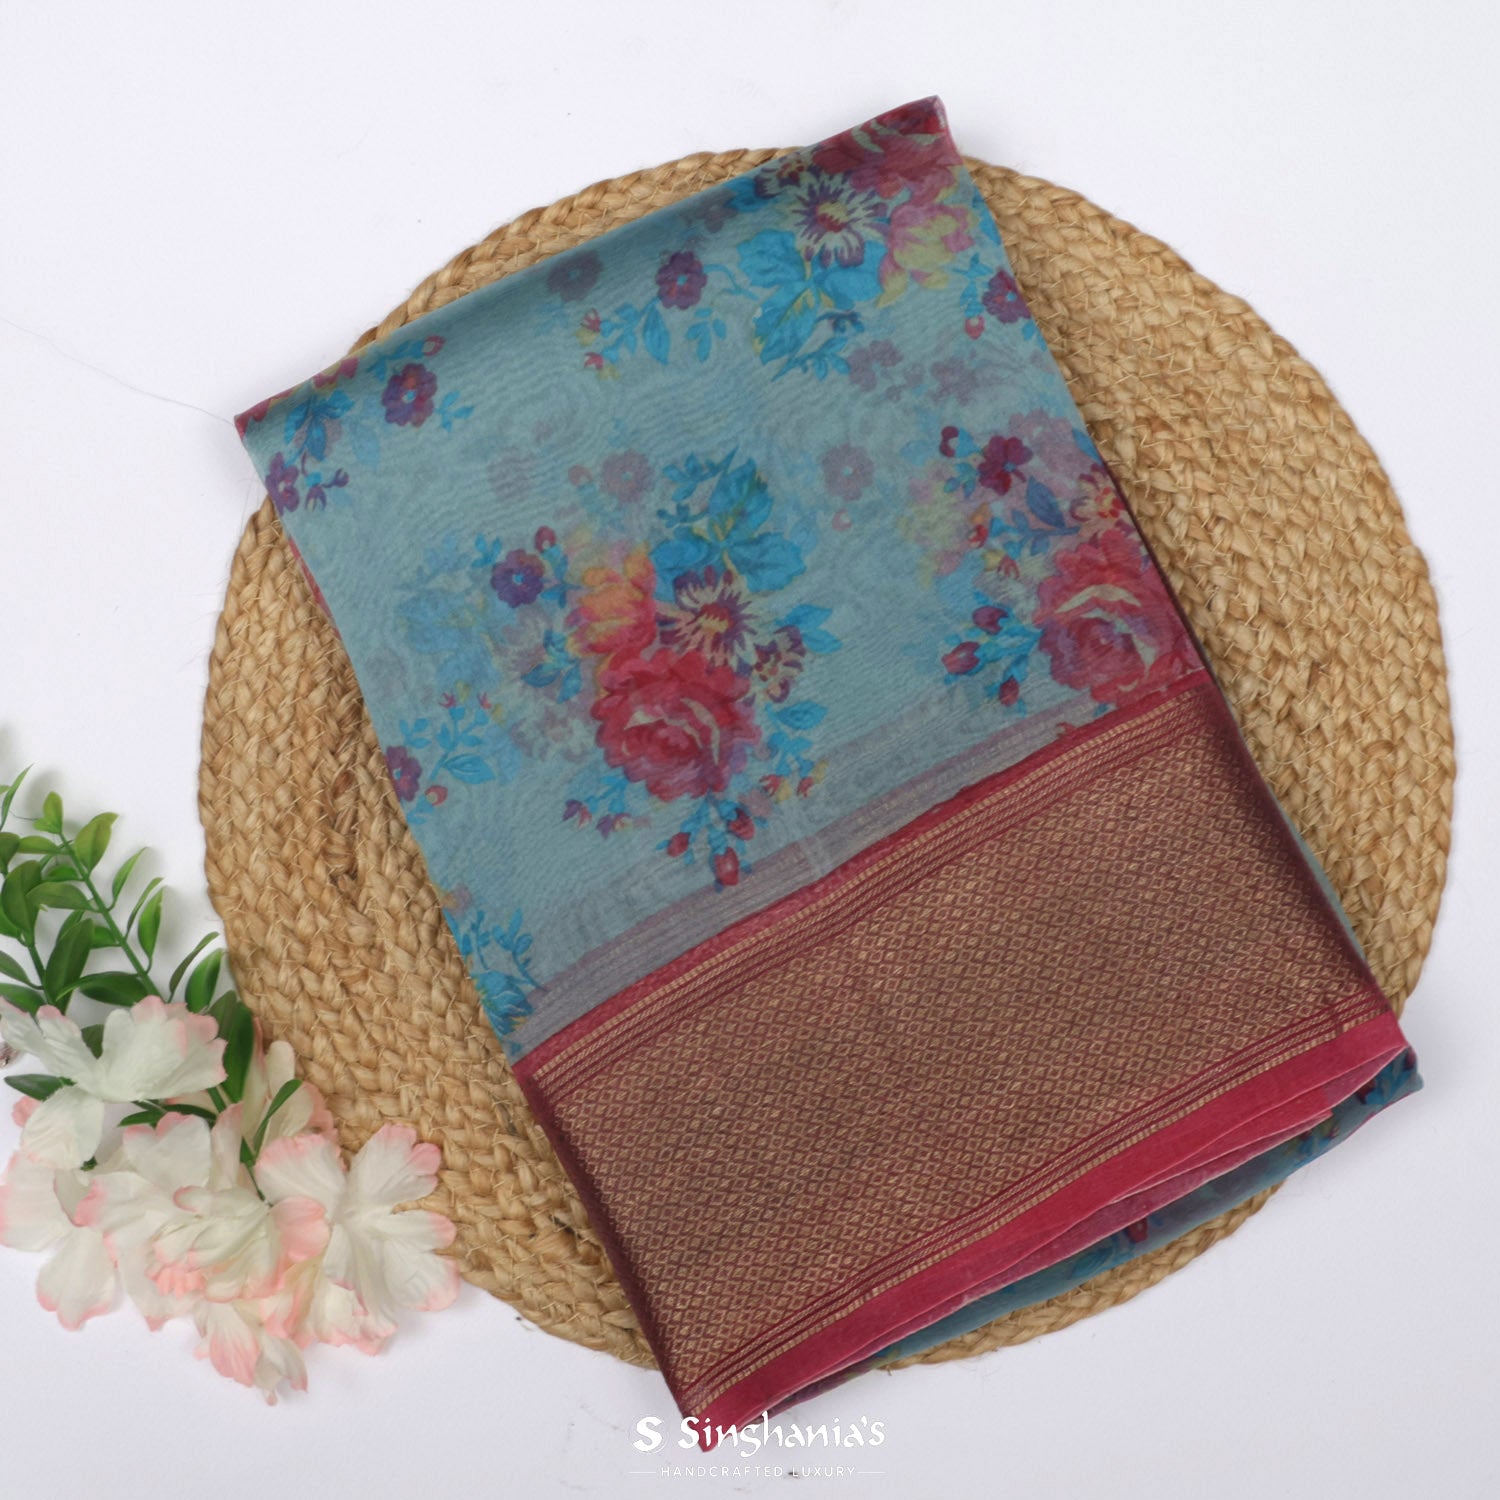 Sky Blue Organza Saree With Floral Printed Pattern